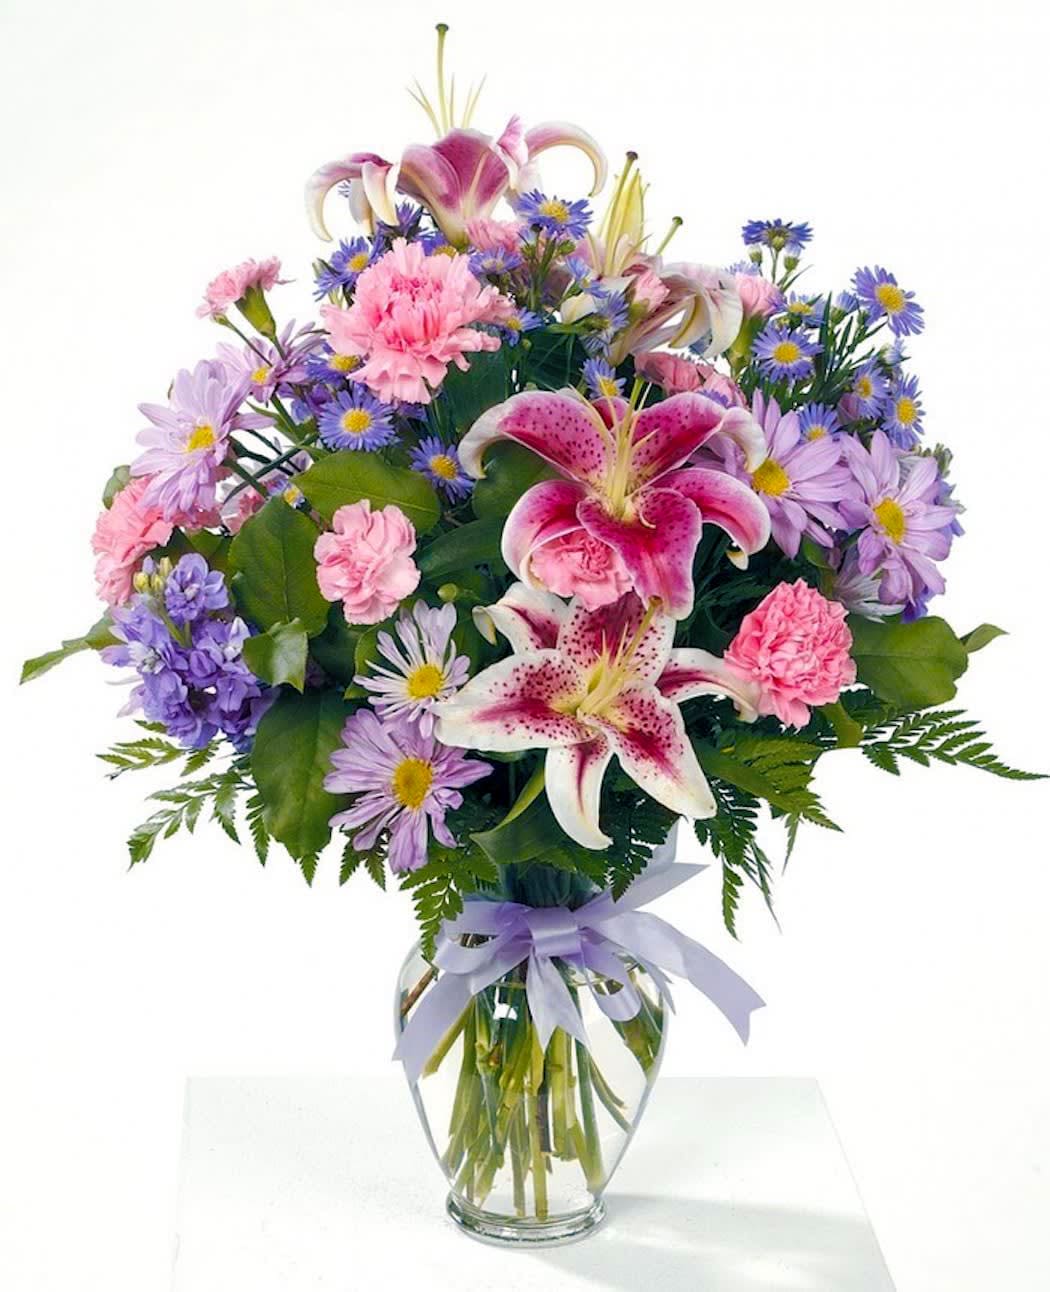 Fragrant Garden  - Beautiful stargazer lilies in a glass vase with pink carnations, lavender daisies and stock. Complimented with a satin ribbon bow. 